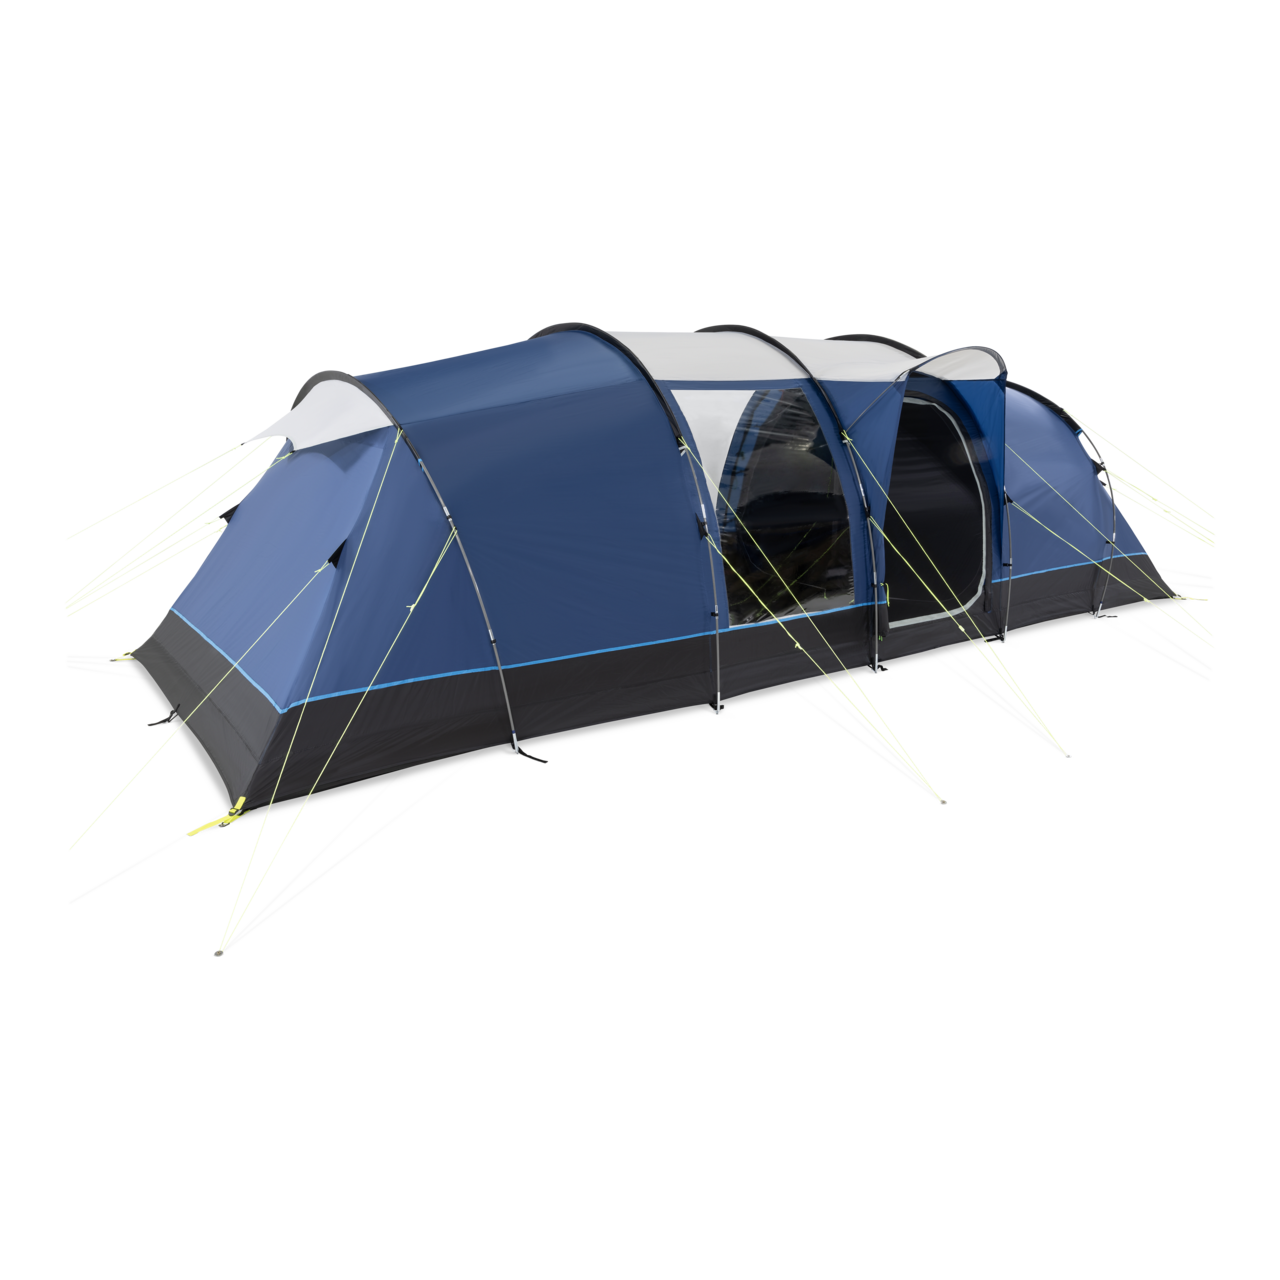 Kampa Watergate 8 - 8 person poled tent - Available in store only